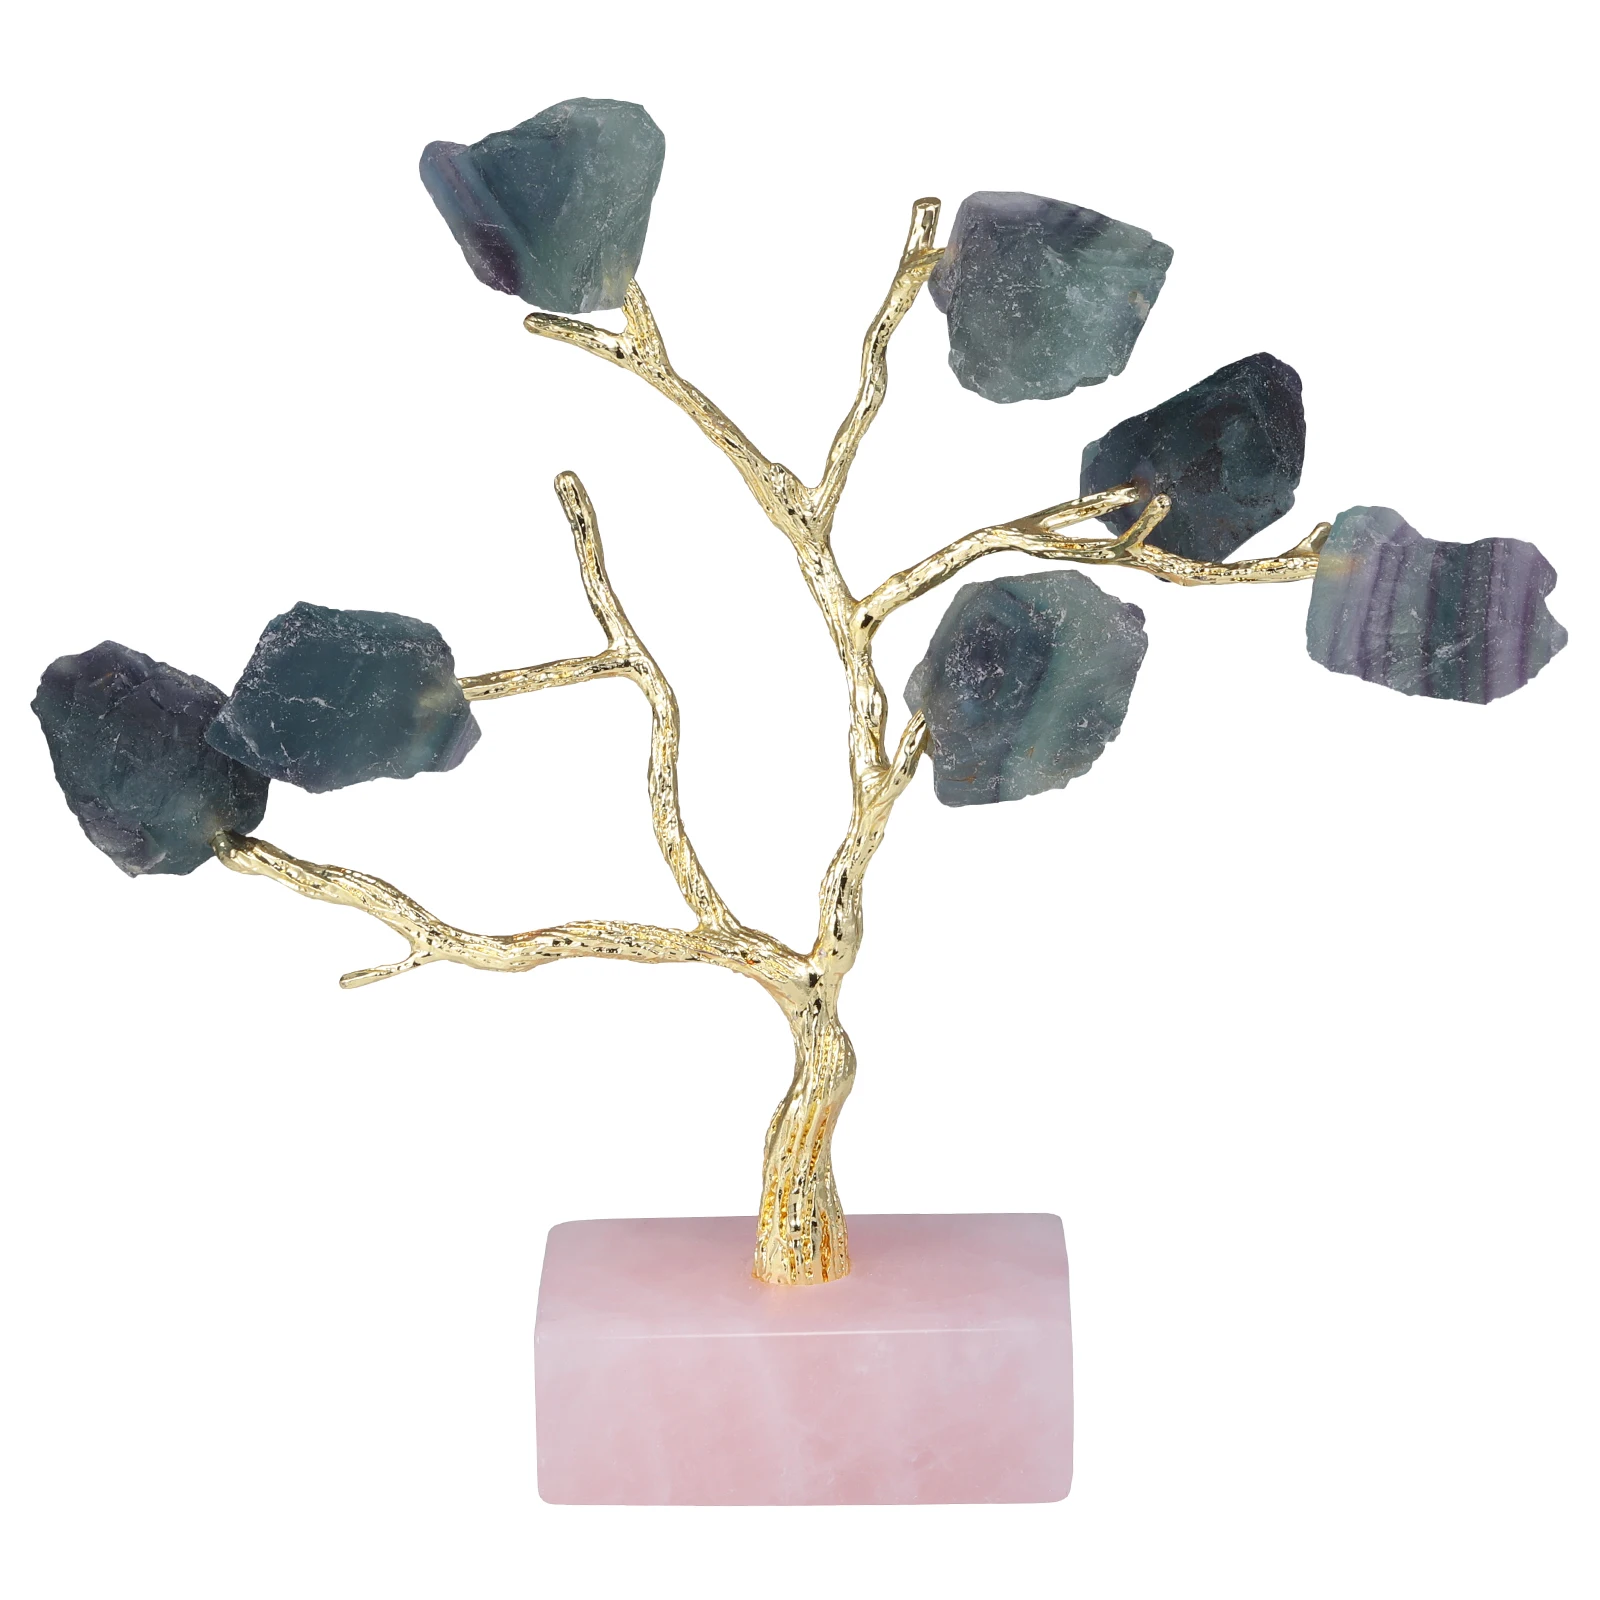 Natural Rough Crystal Stone Tree With Rose Quartz Base Healing Gemstone Golden Tree For Jewelry Organizer Home Table Decoration 10 50g natural rough malachite minerals healing gemstone specimen irregular stone ornaments for home decor